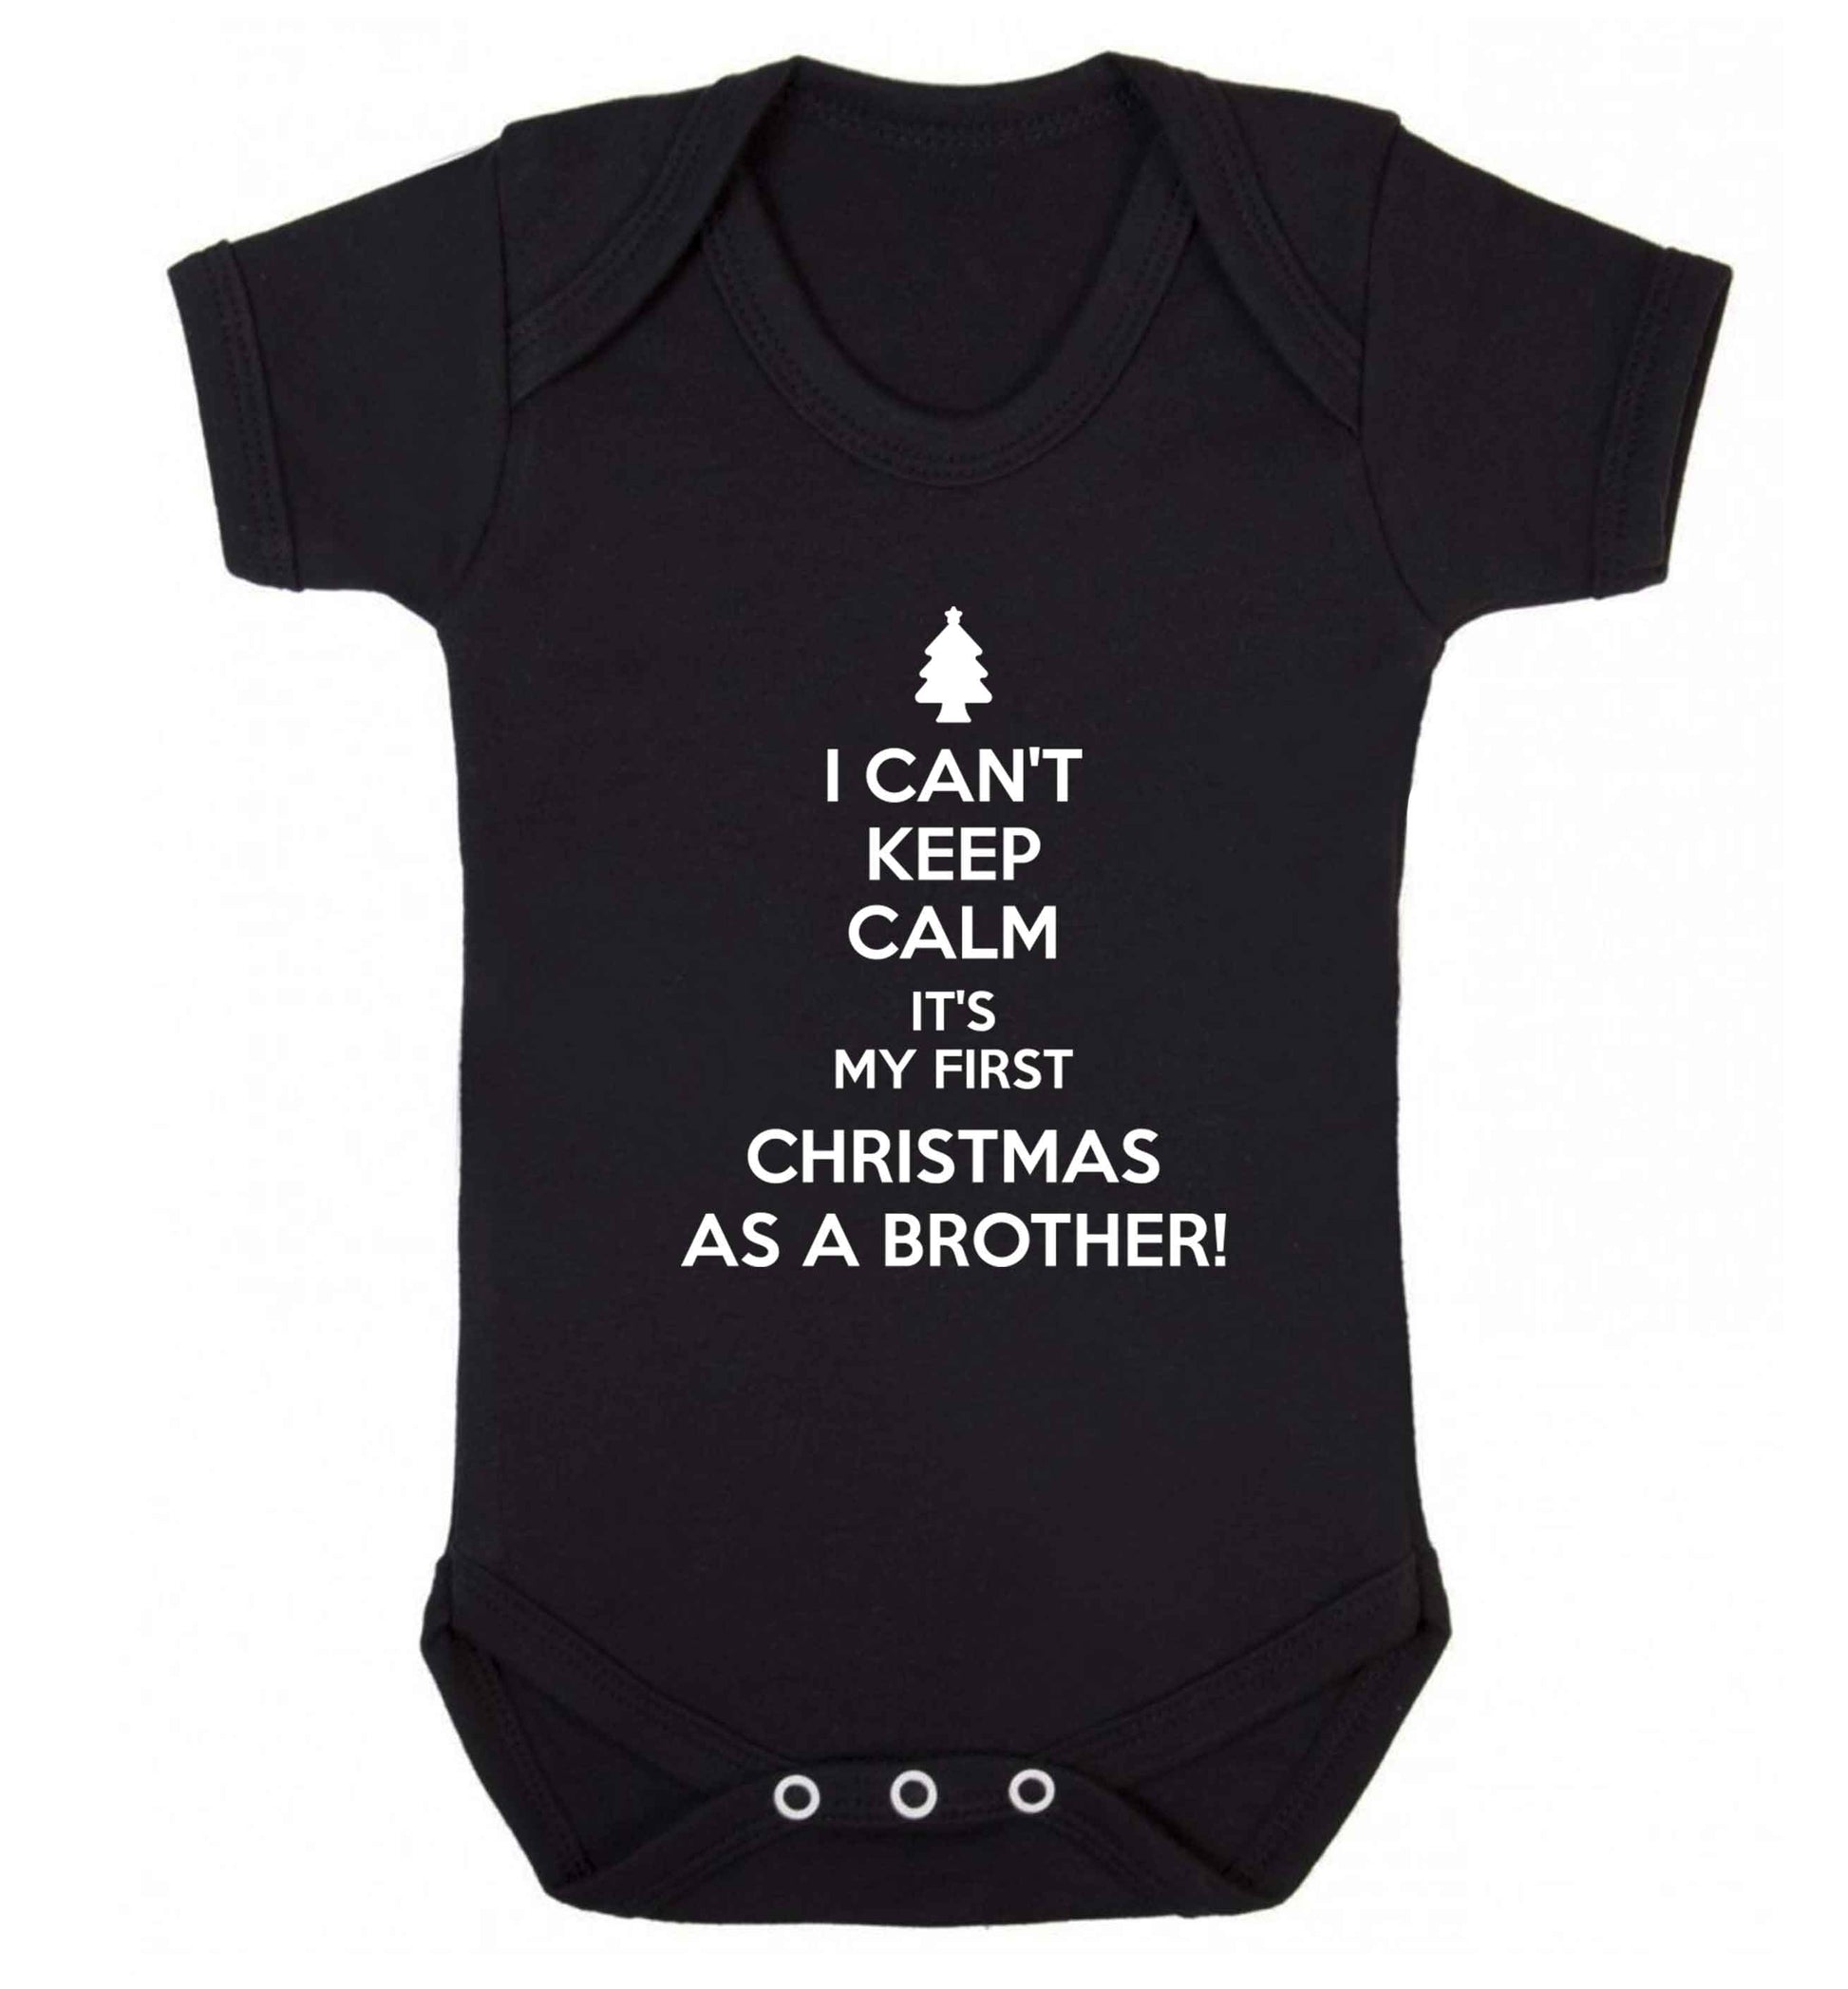 I can't keep calm it's my first Christmas as a brother! Baby Vest black 18-24 months